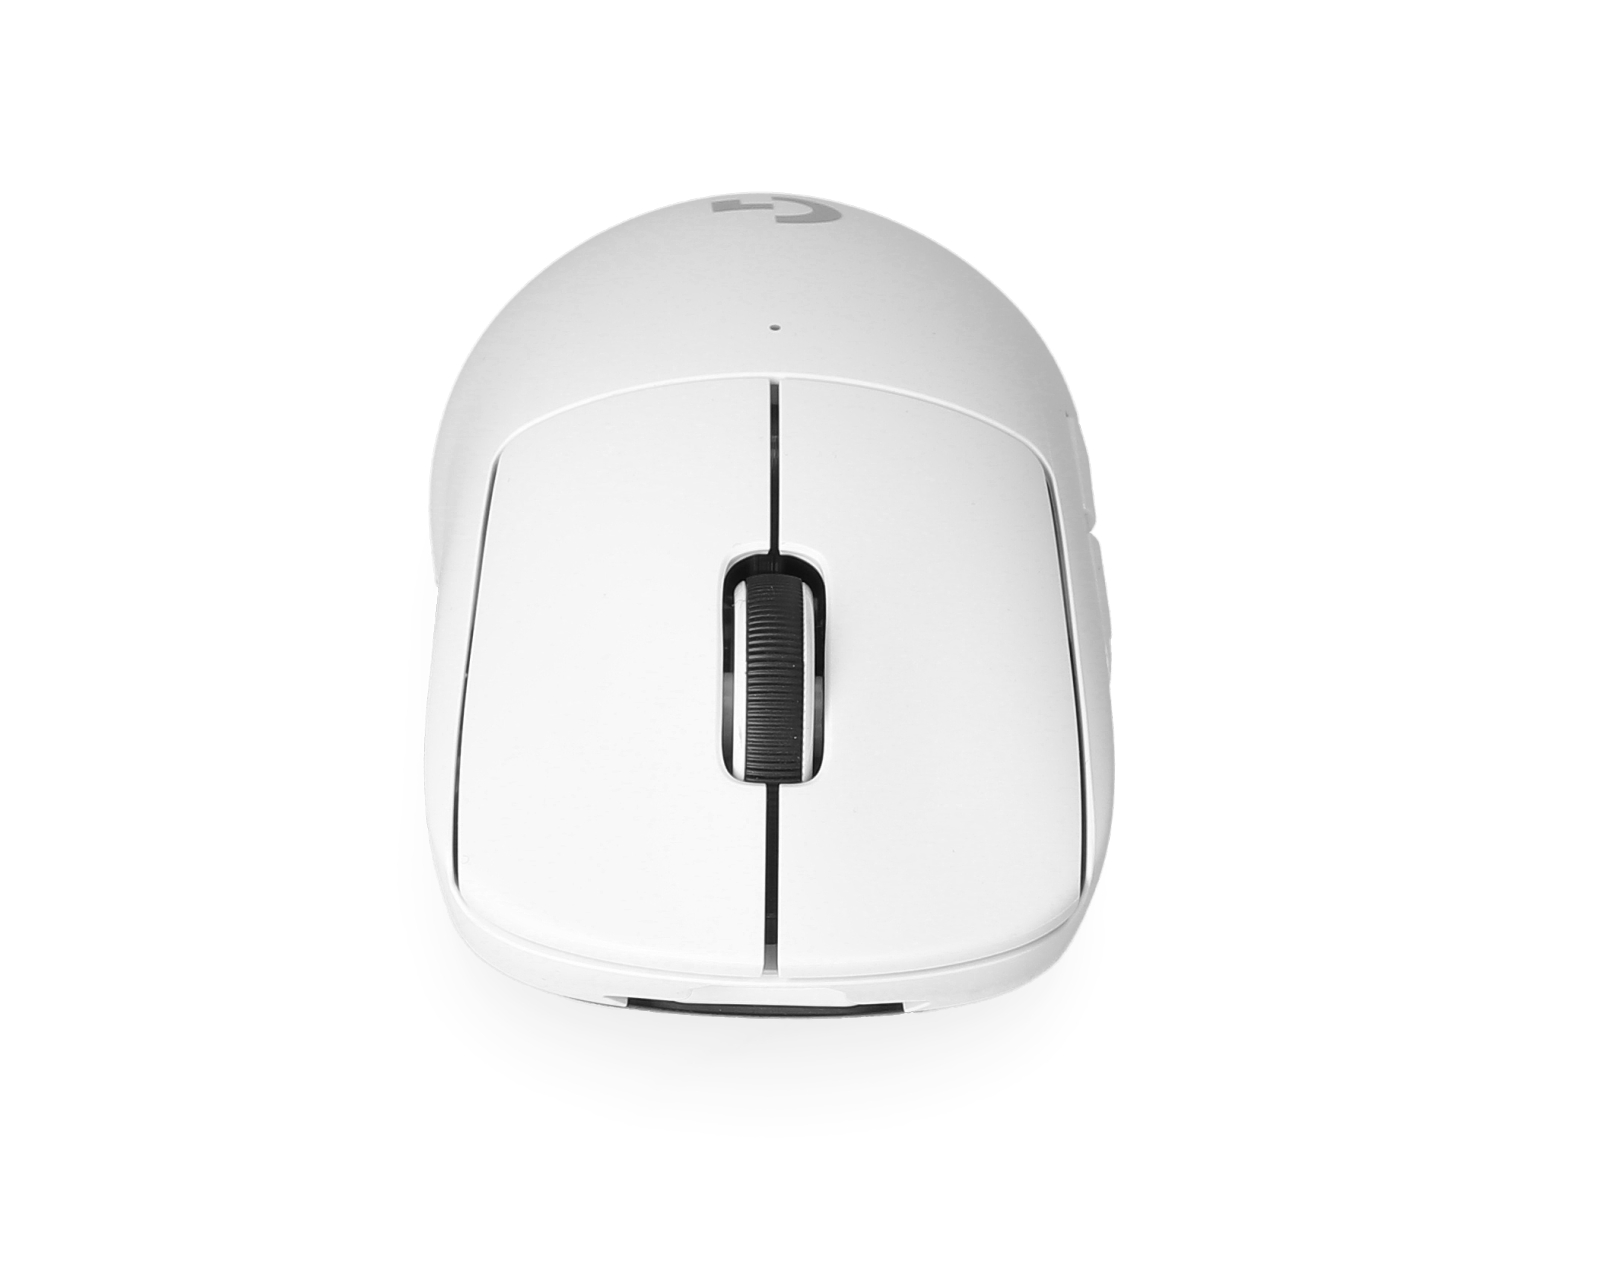 G PRO X Wireless Gaming Mouse - White - MaxGaming.com